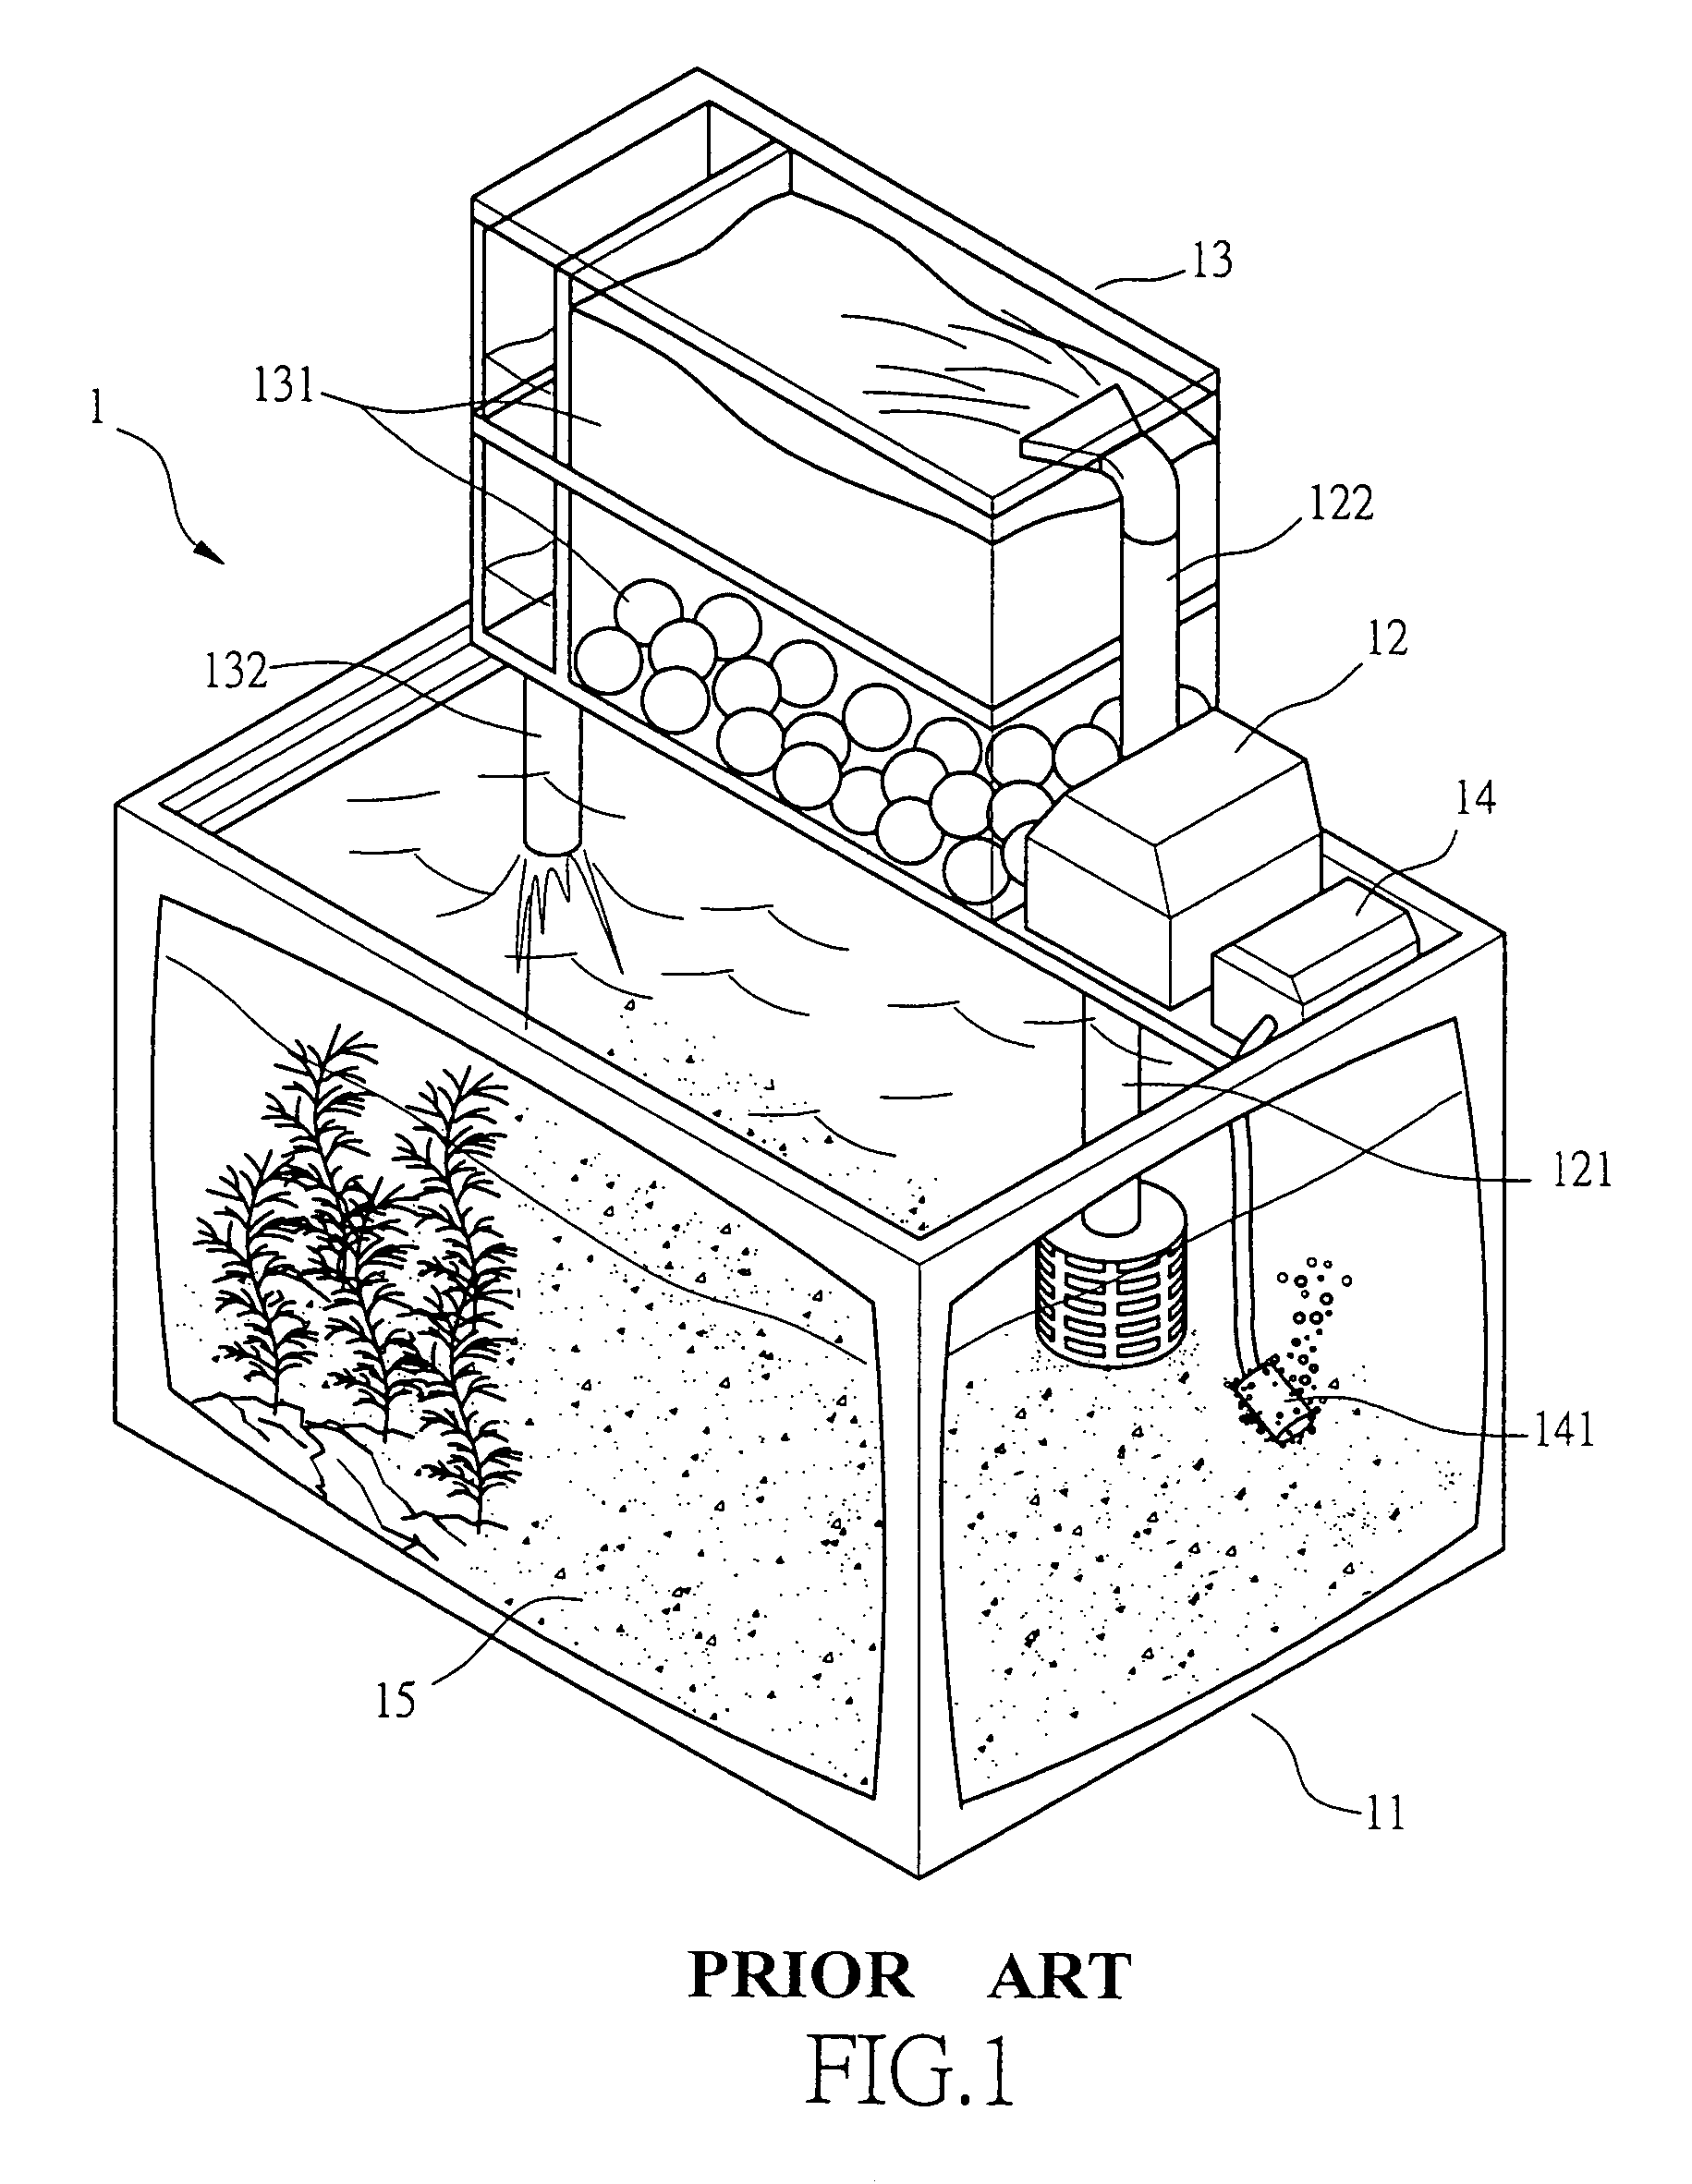 Aquarium device with enhanced water filtration